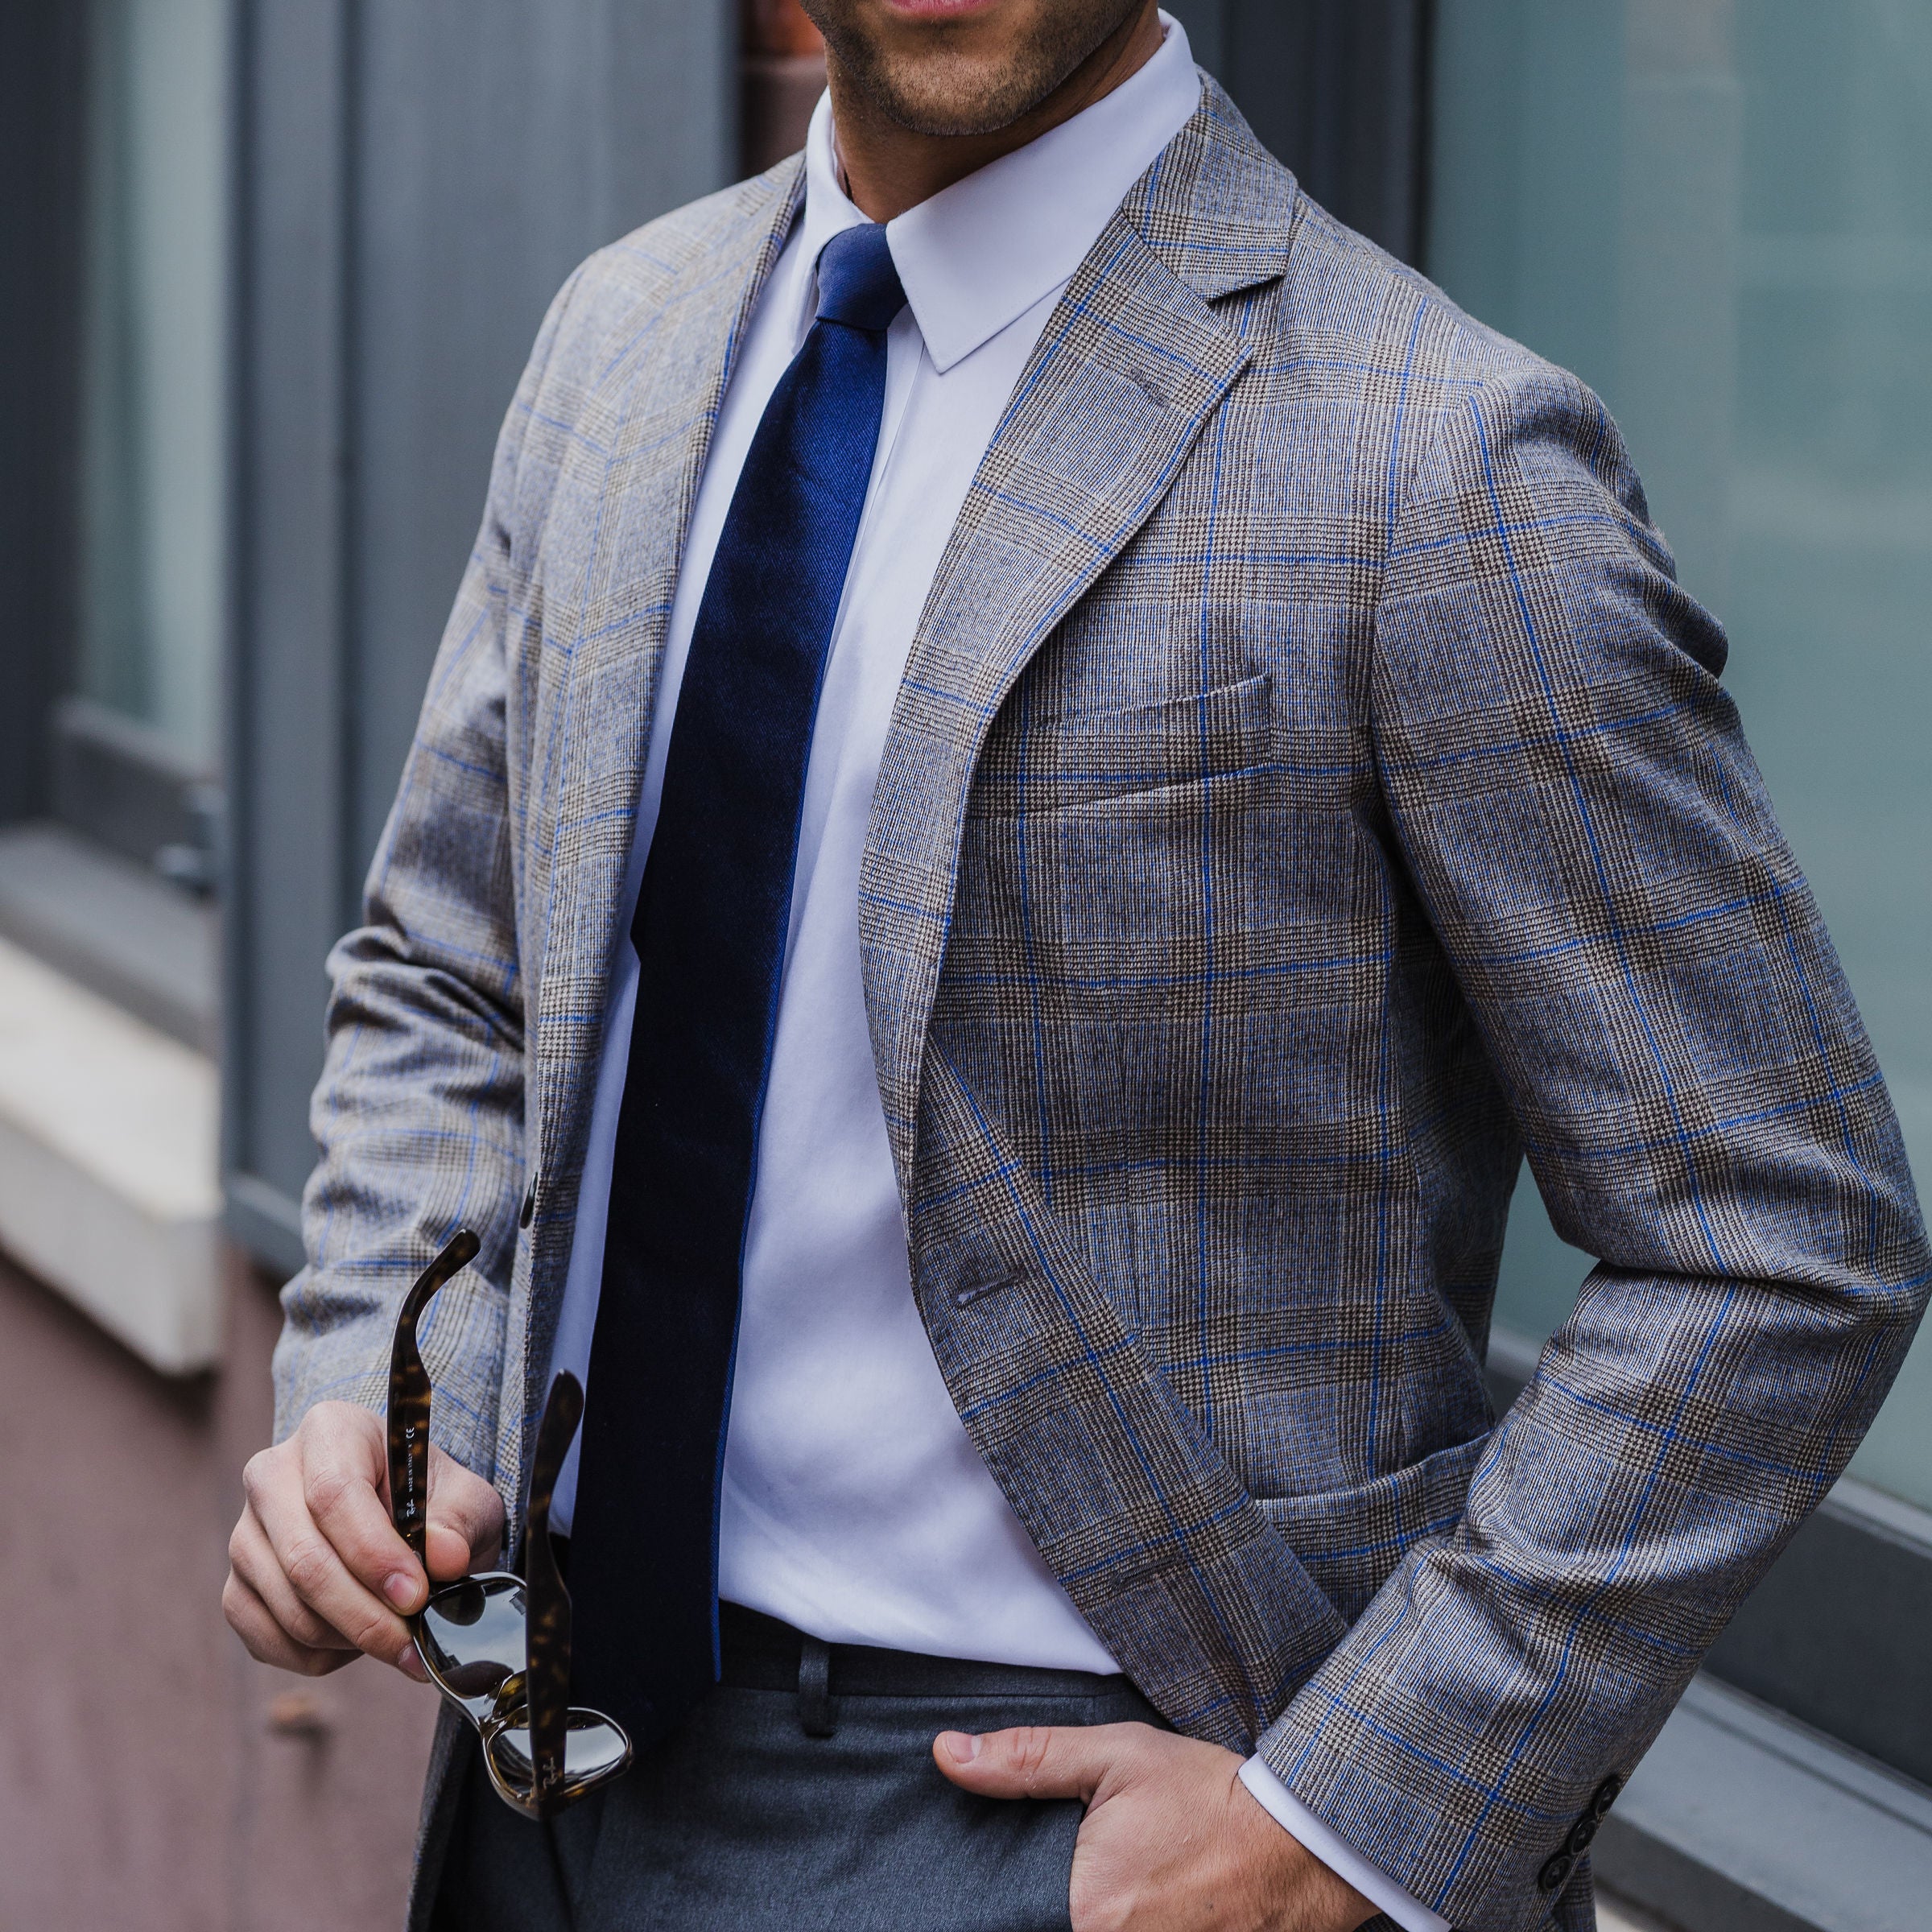 Dress Shirt Colors: A Guide to Picking the Perfect Shade